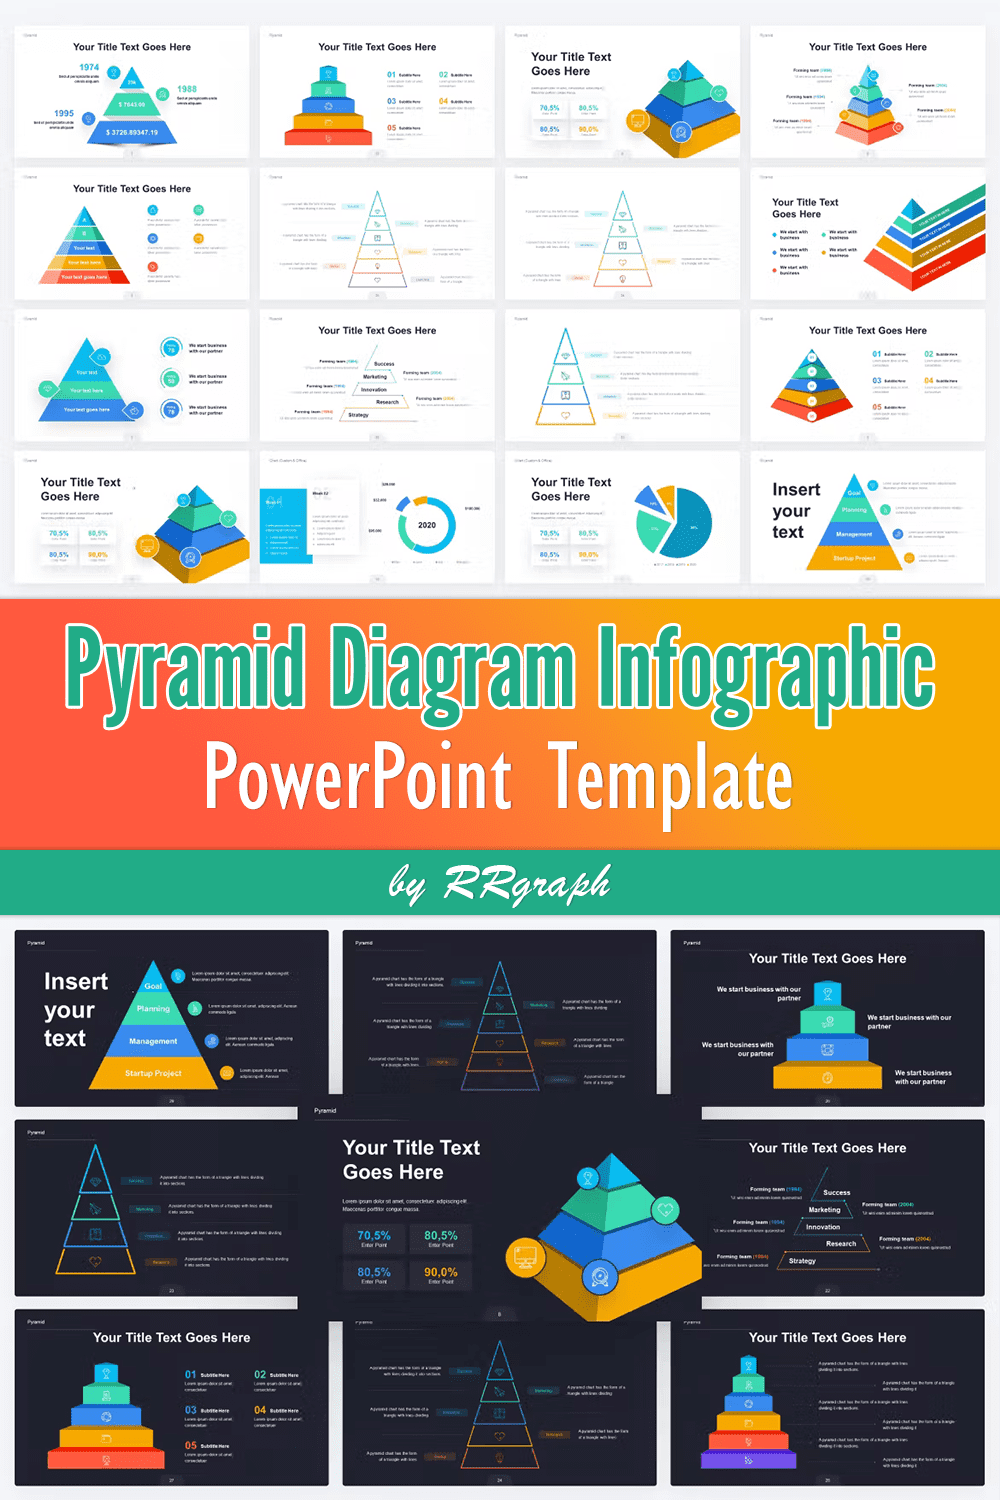 Pyramid Chart Infographic PowerPoint Template - Pinterest.